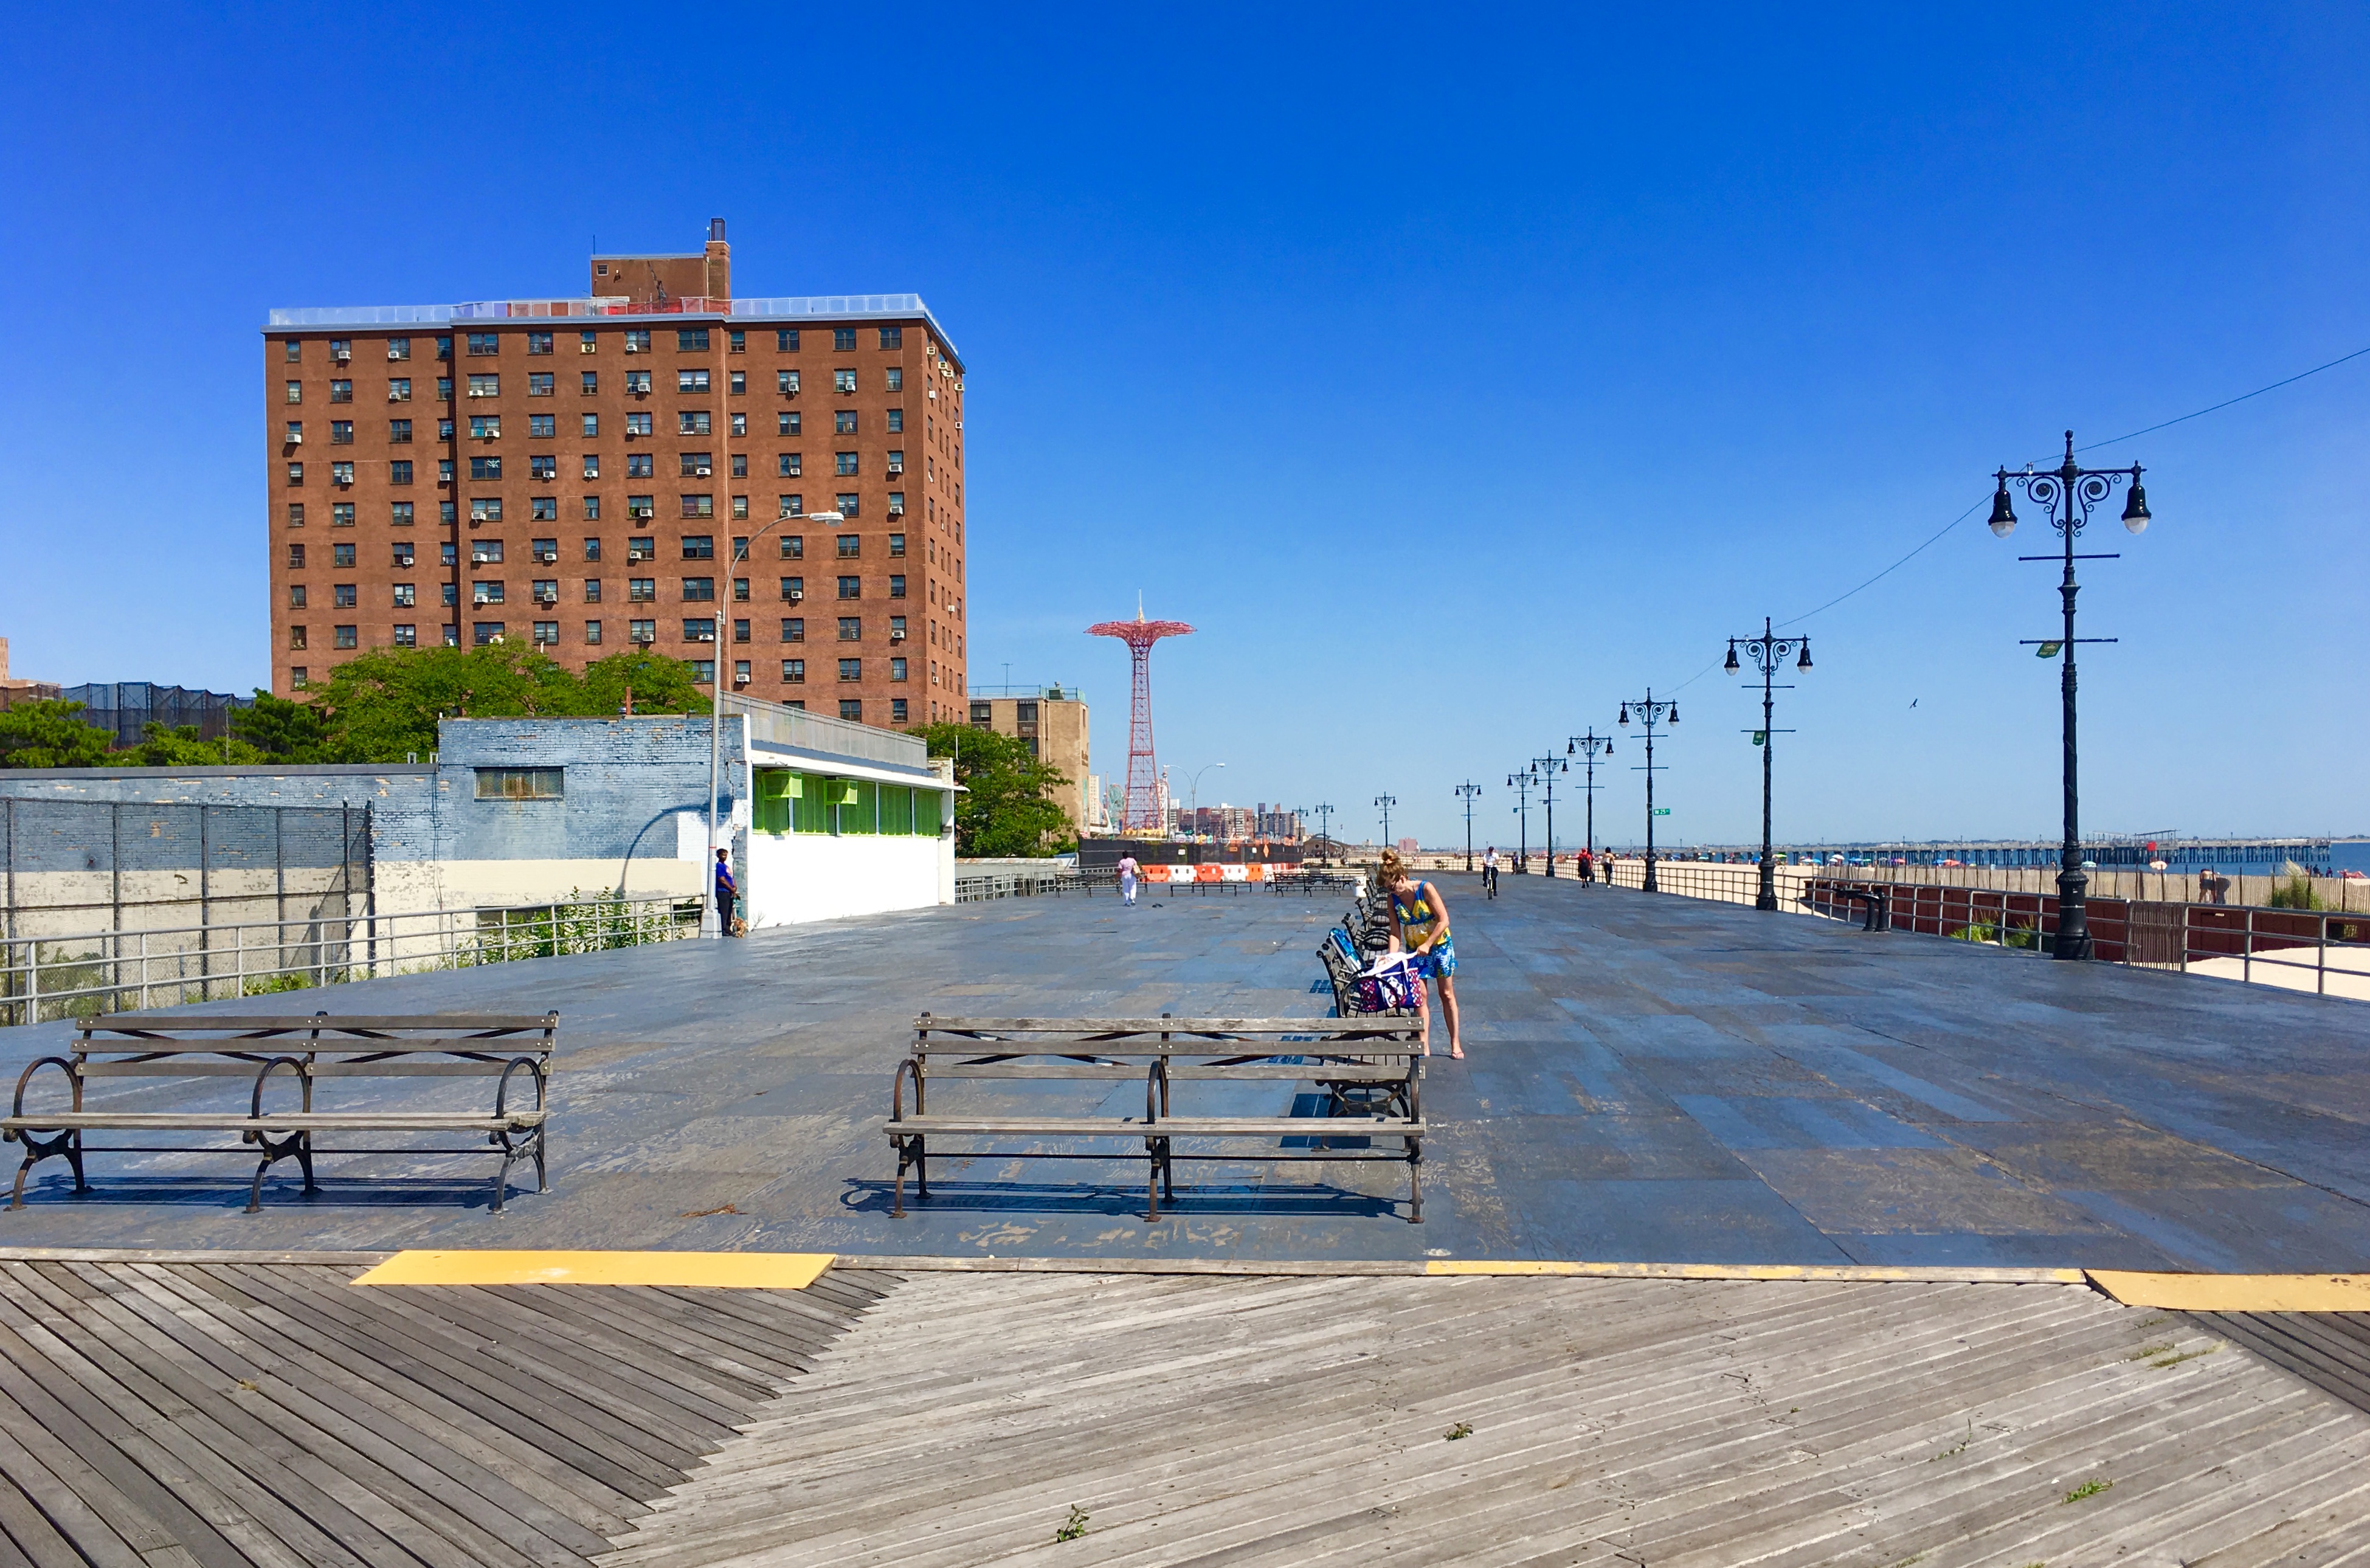 This plywood deck covers the Coney Island Boardwalk from West 24th to West 27th streets. Eagle photo by Lore Croghan